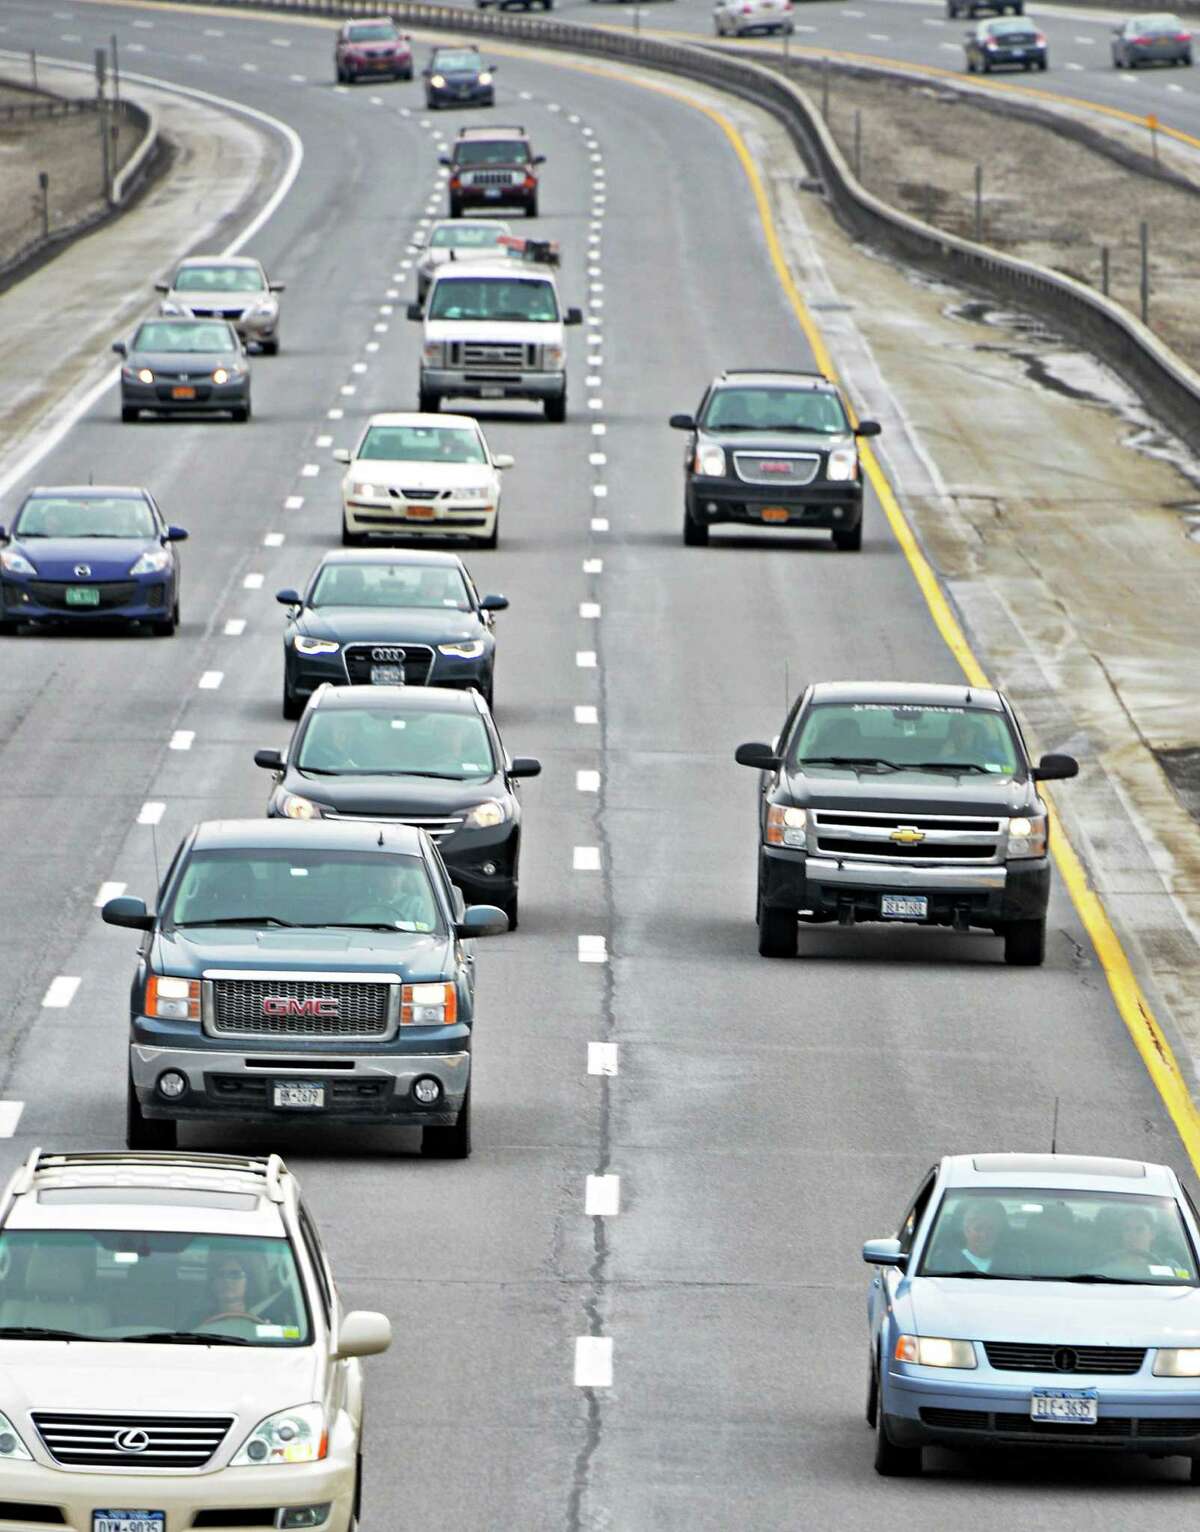 I-87 traffic heads north towards the Riverview Road overpass Tuesday March 10, 2015, in Clifton Park, N.Y. (John Carl D'Annibale / Times Union)